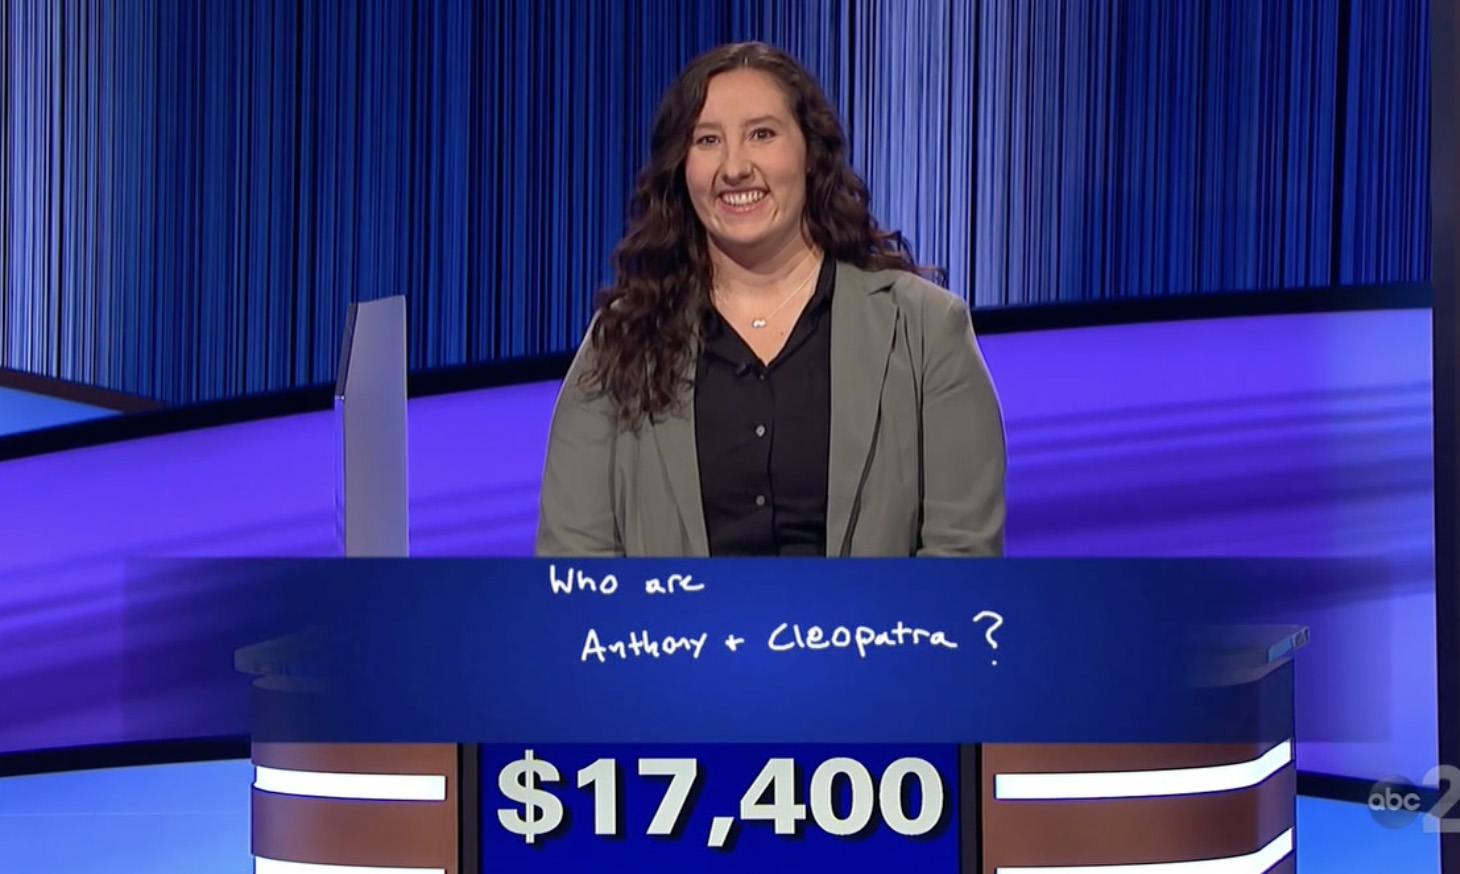 Xanni Brown won the game with 'Anthony' instead of 'Antony'